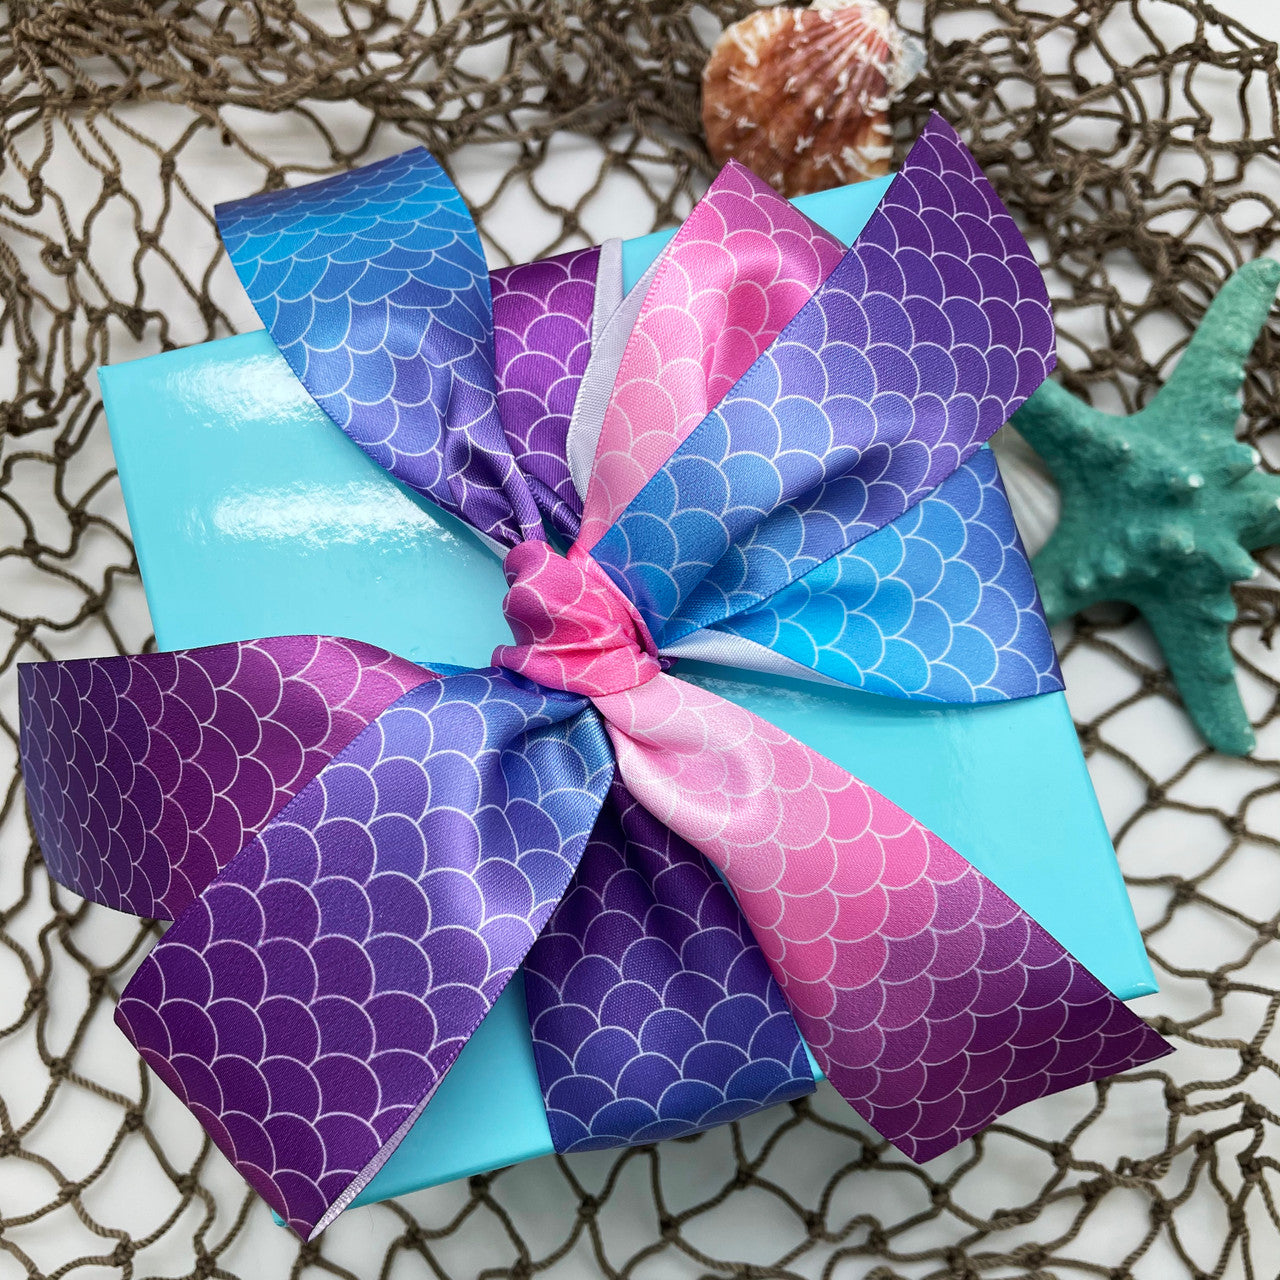 A gift made extra special with our ombre mermaid scales ribbon!